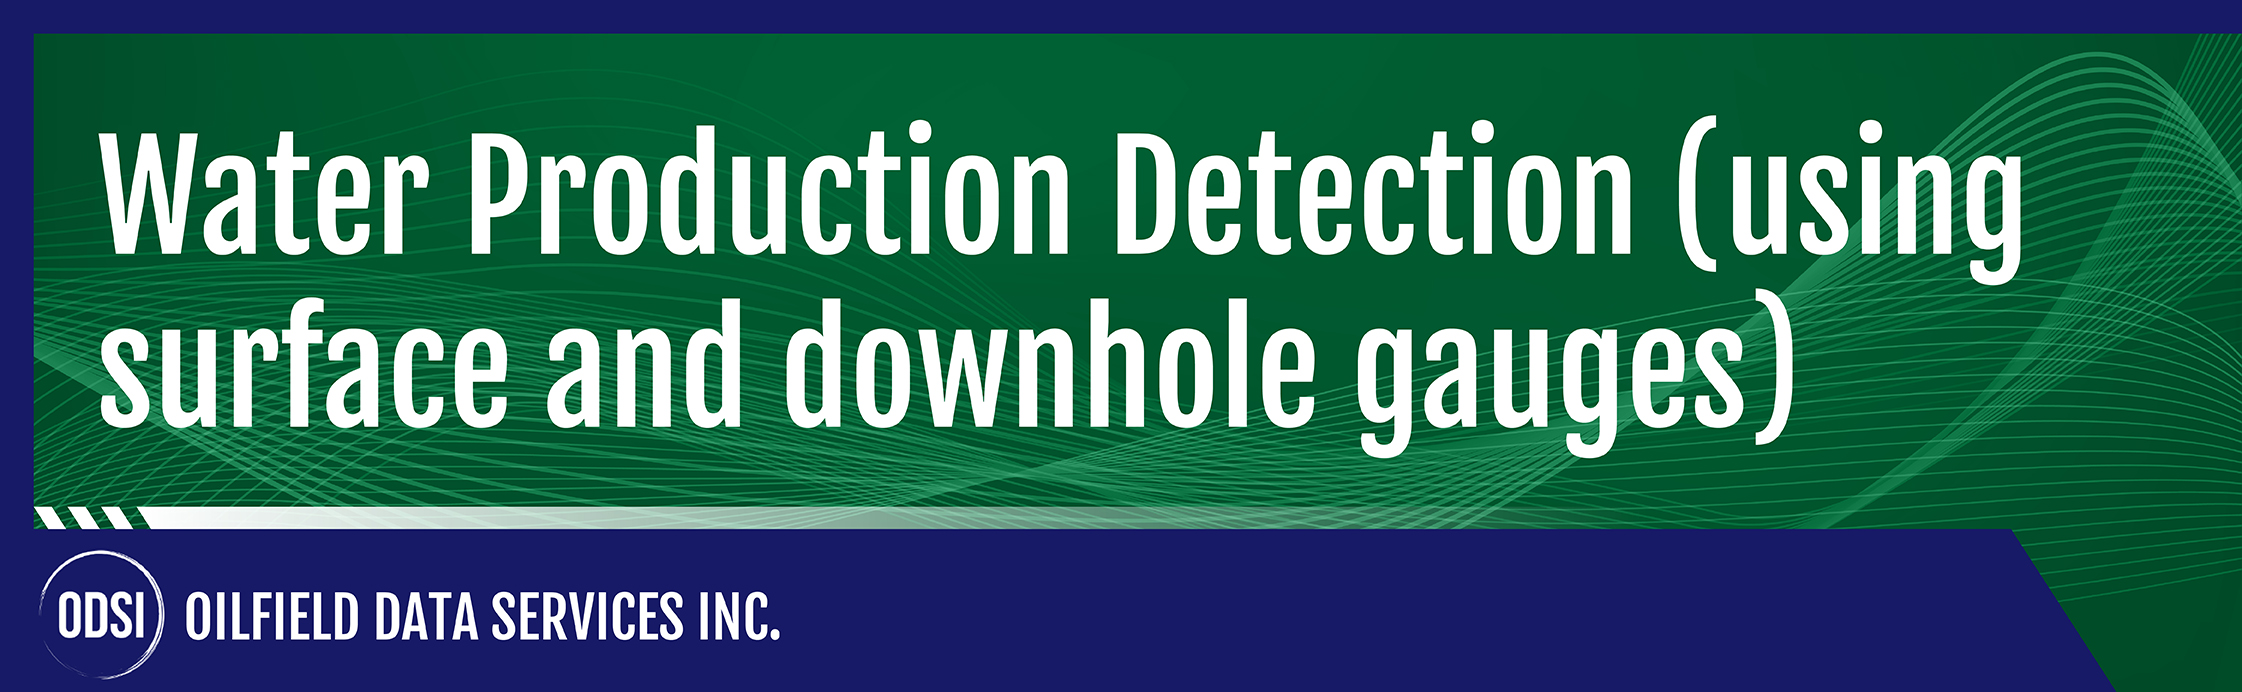 Water Production Detection using downhole gauges